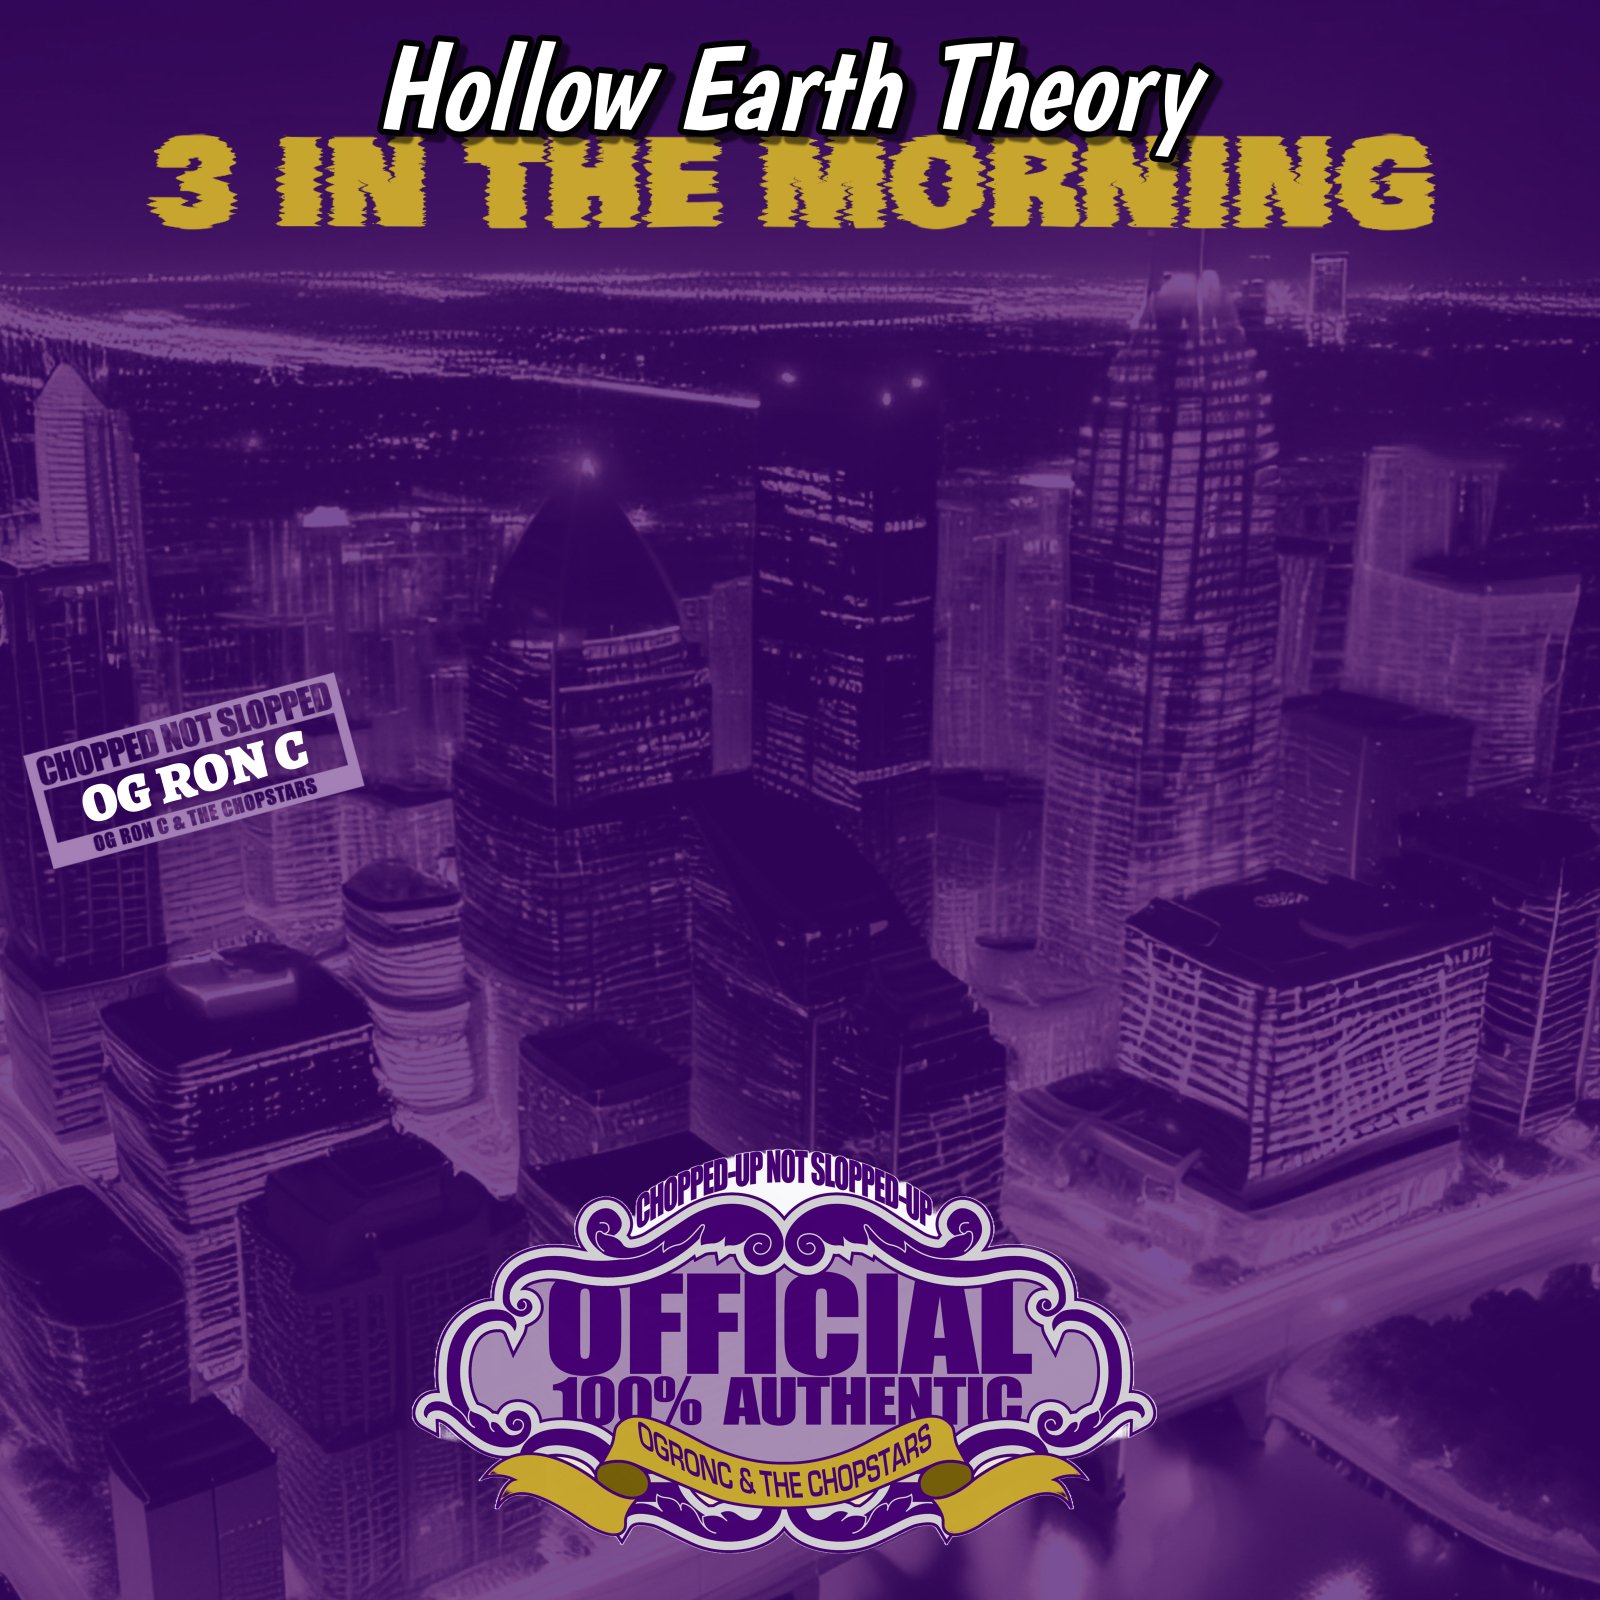 Hollow Earth Theory – “3 in the Morning”